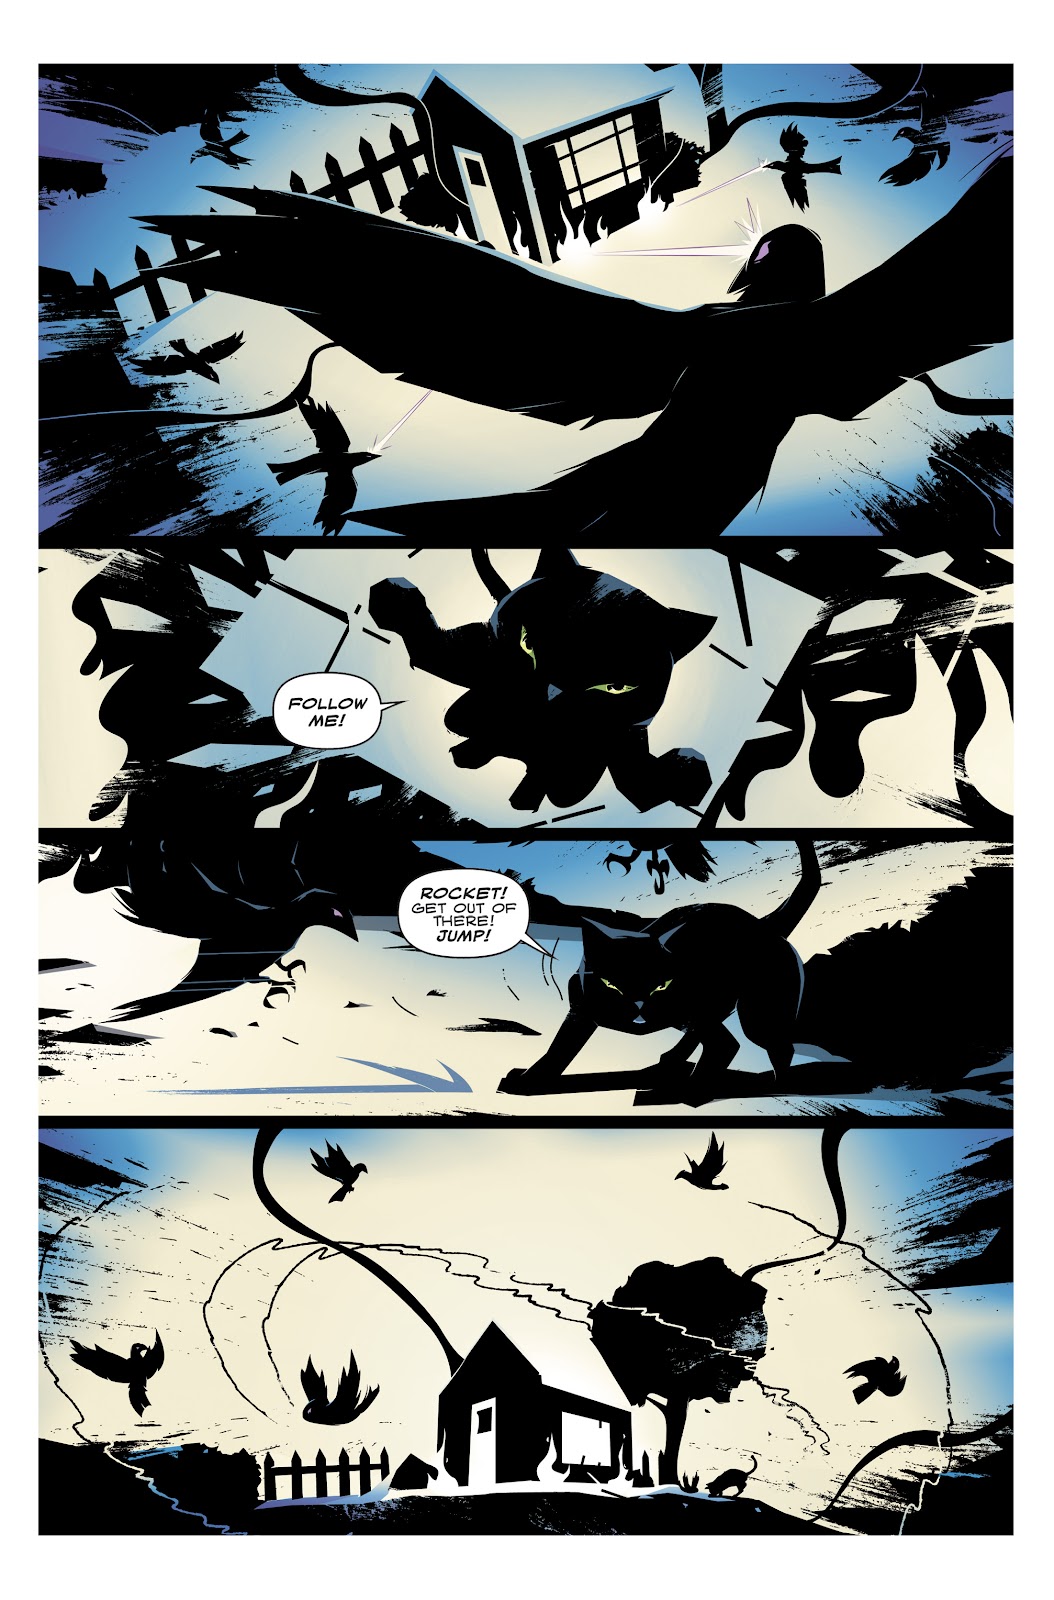 Hero Cats: Midnight Over Stellar City Vol. 2 issue 1 - Page 12